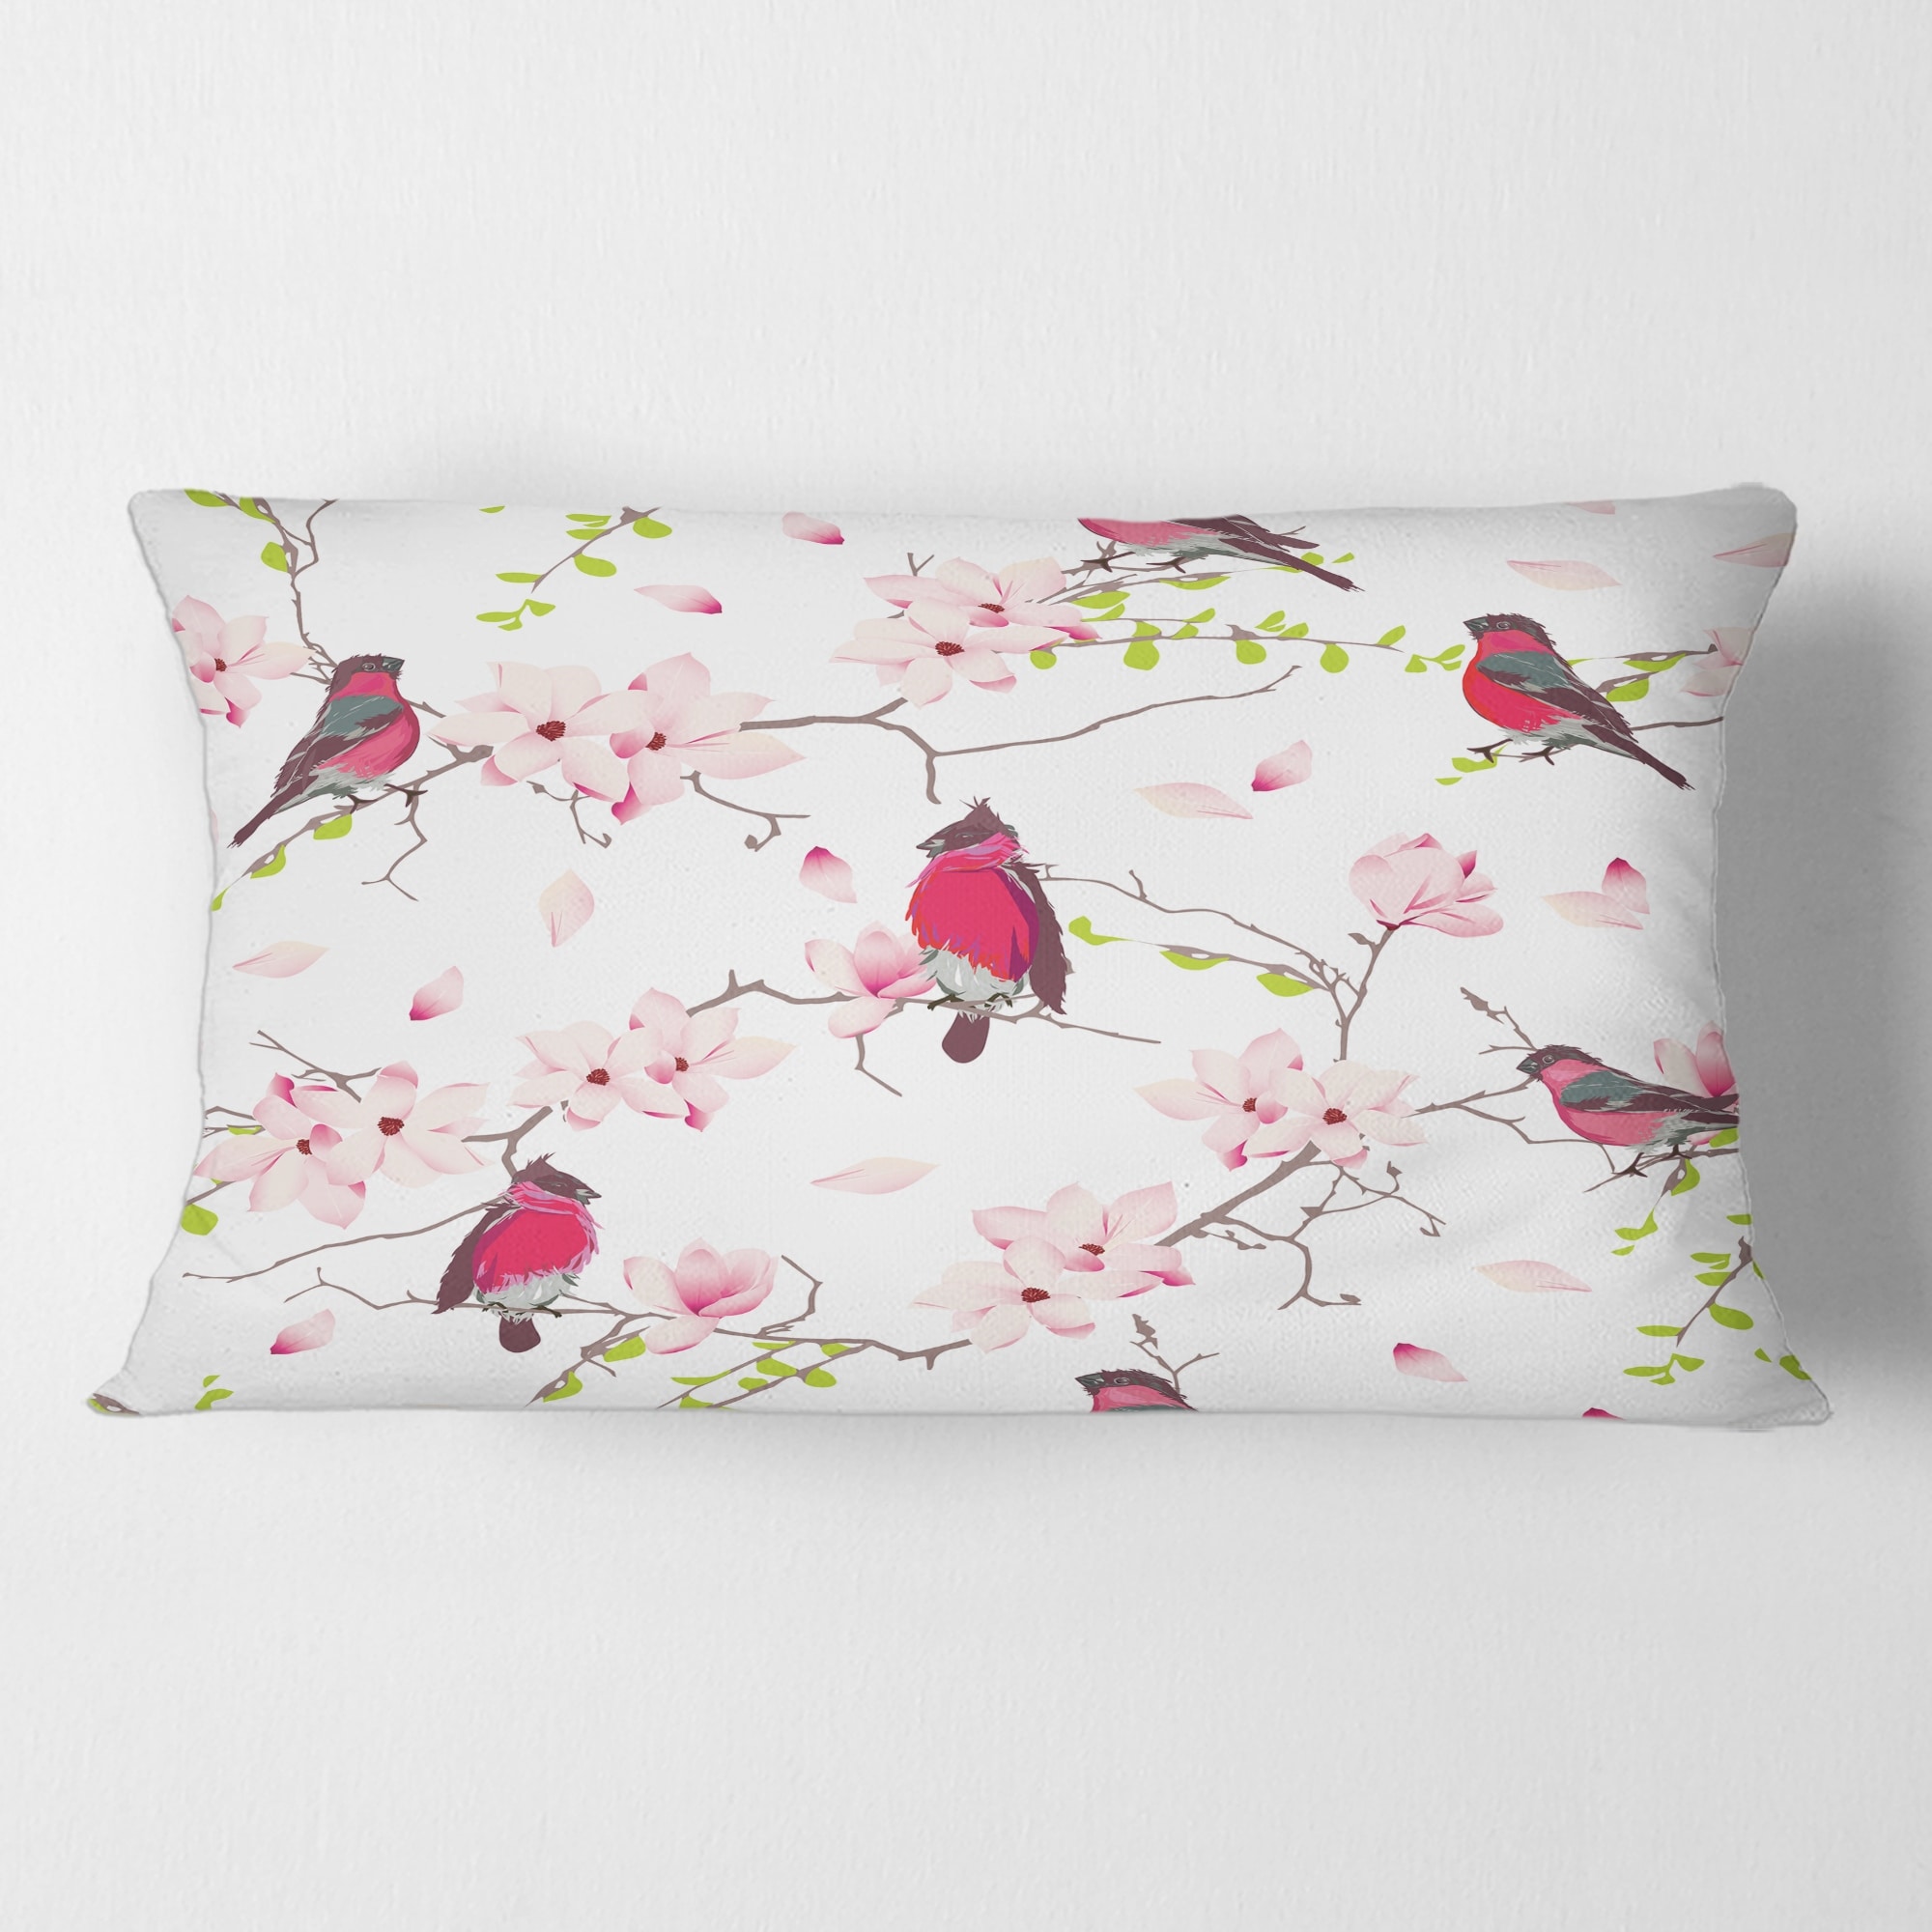 https://ak1.ostkcdn.com/images/products/is/images/direct/0d22377282a4fc57db42e23c96748839184be4c4/Designart-%27Red-Bullfinches-On-Magnolia-Tree%27-Traditional-Printed-Throw-Pillow.jpg